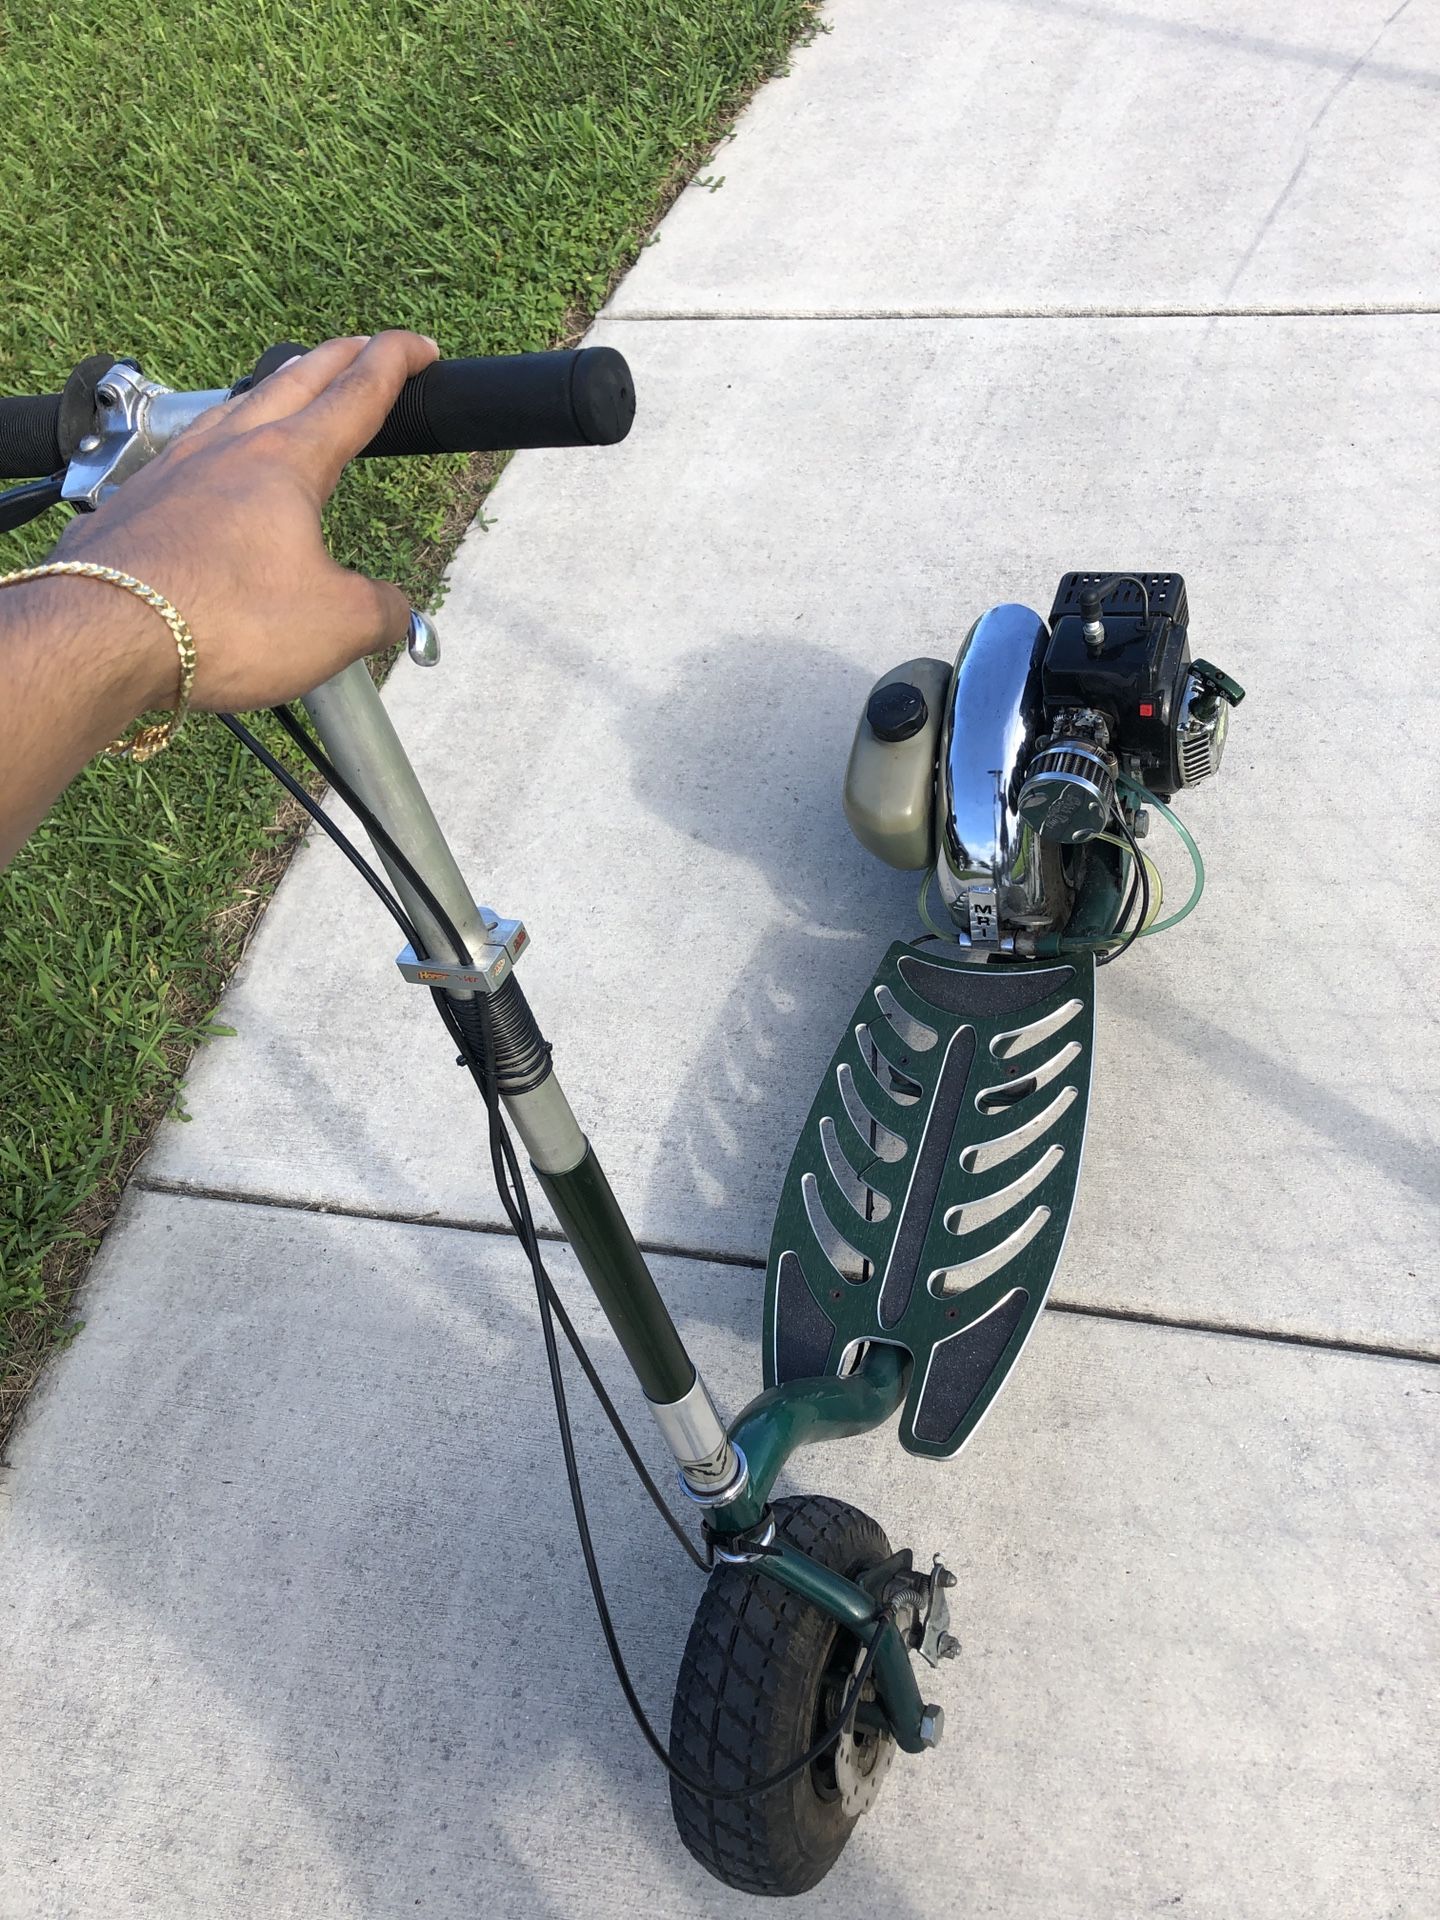 Goped Motor scooter